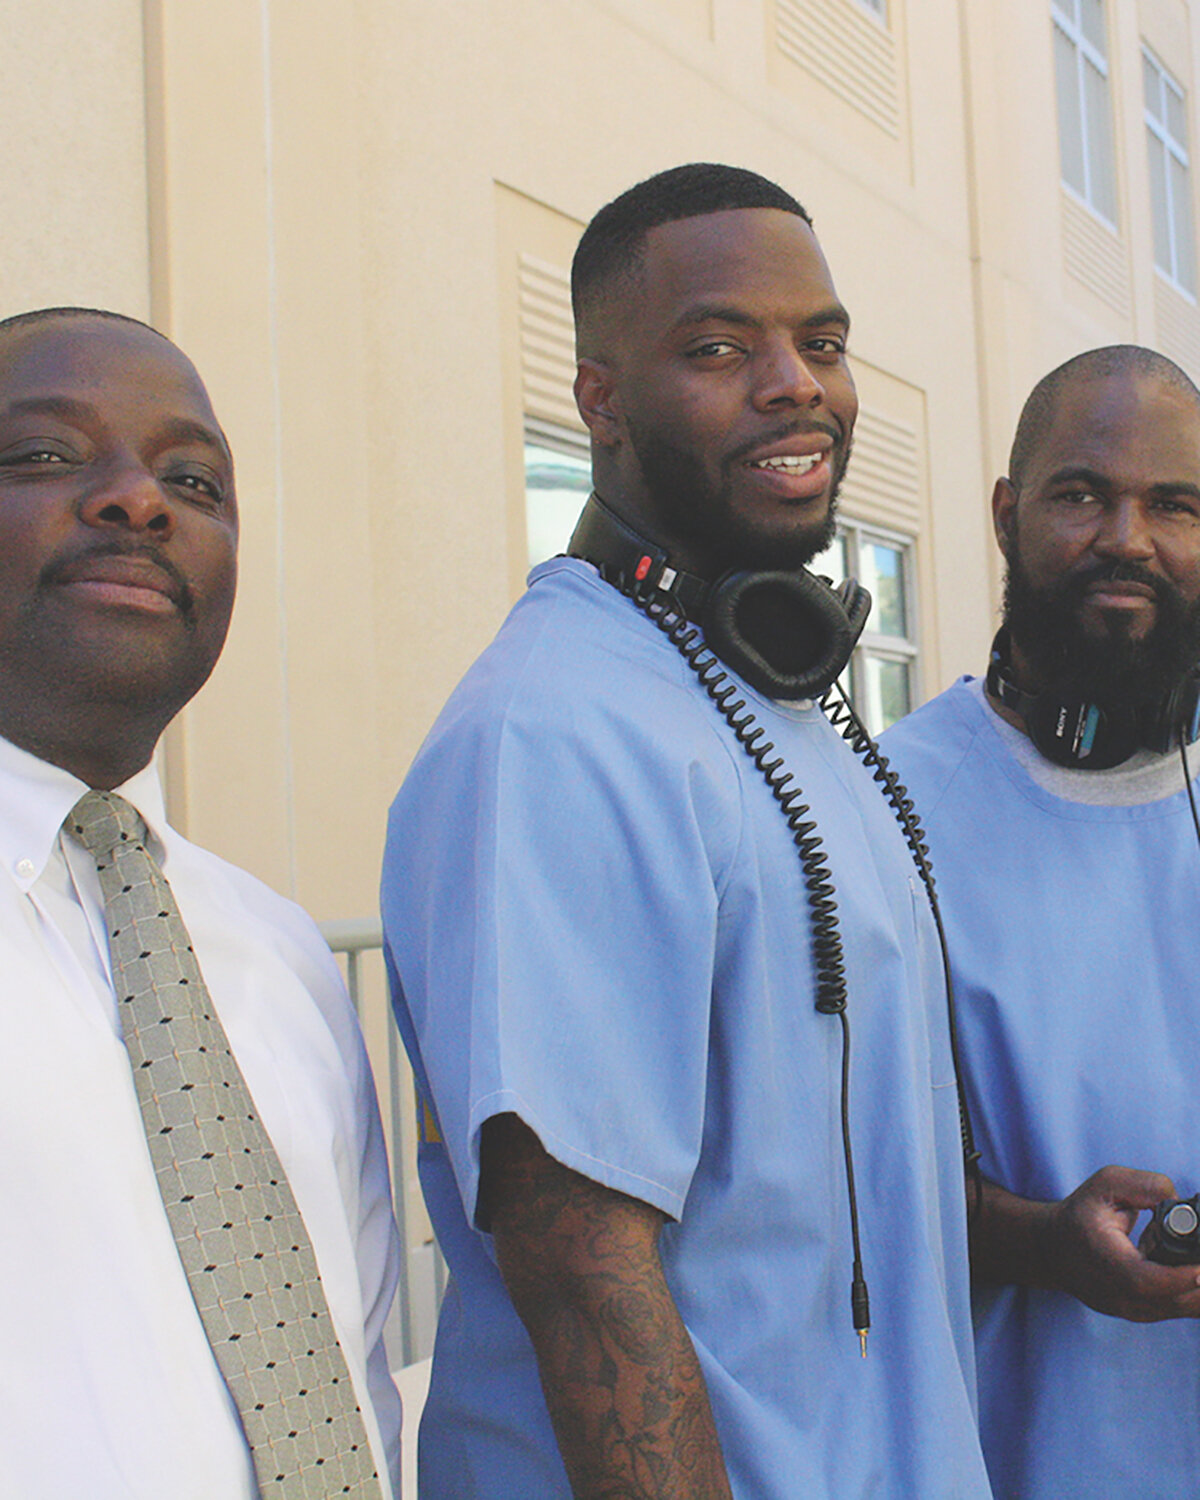 three men pose for the camera, two wearing blue, one with headphones, and one in white